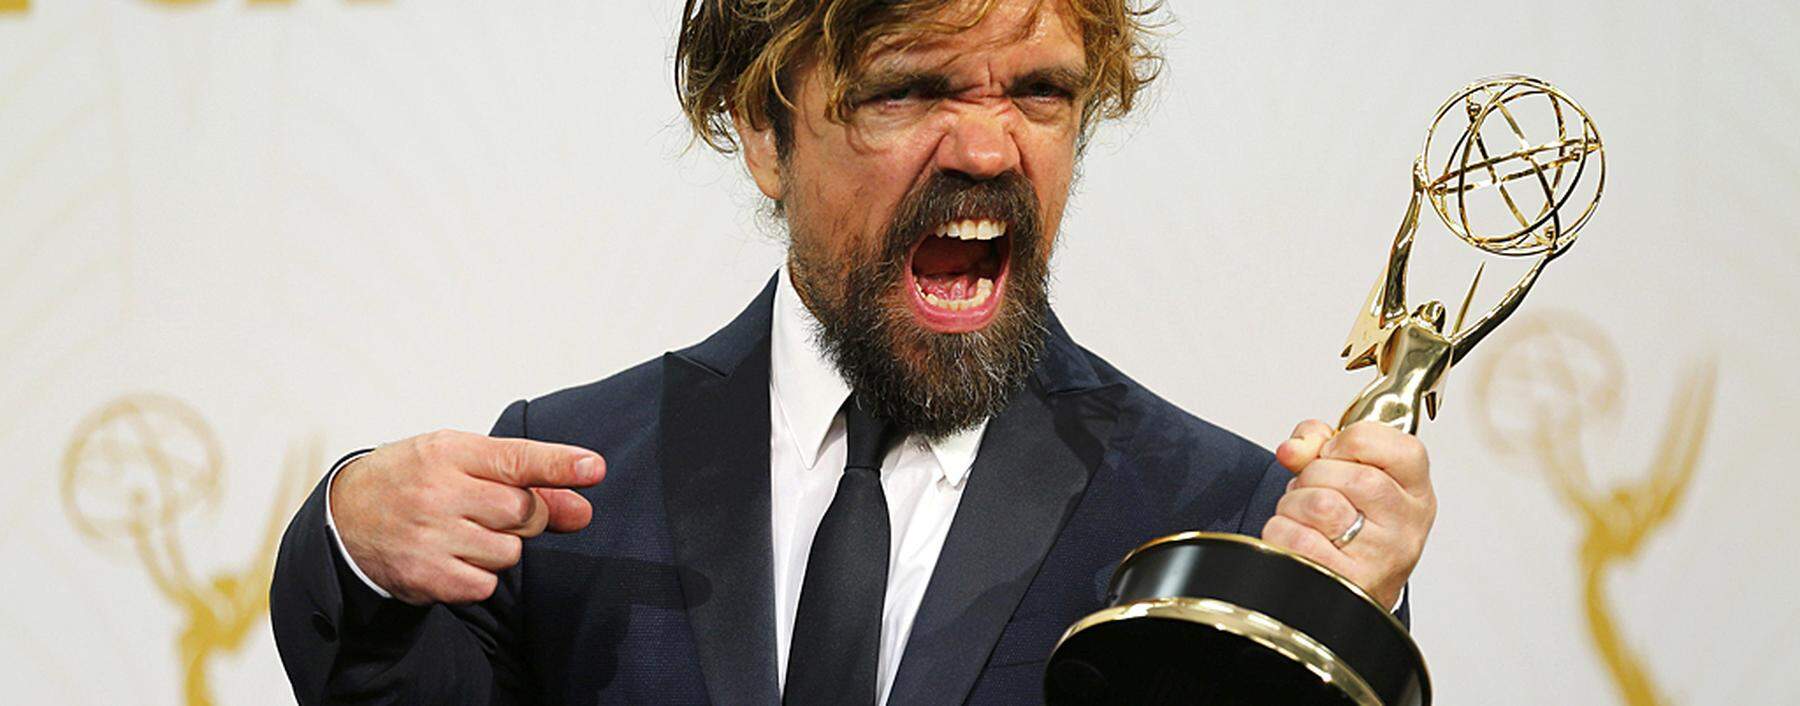 Peter Dinklage poses with his award during the 67th Primetime Emmy Awards in Los Angeles